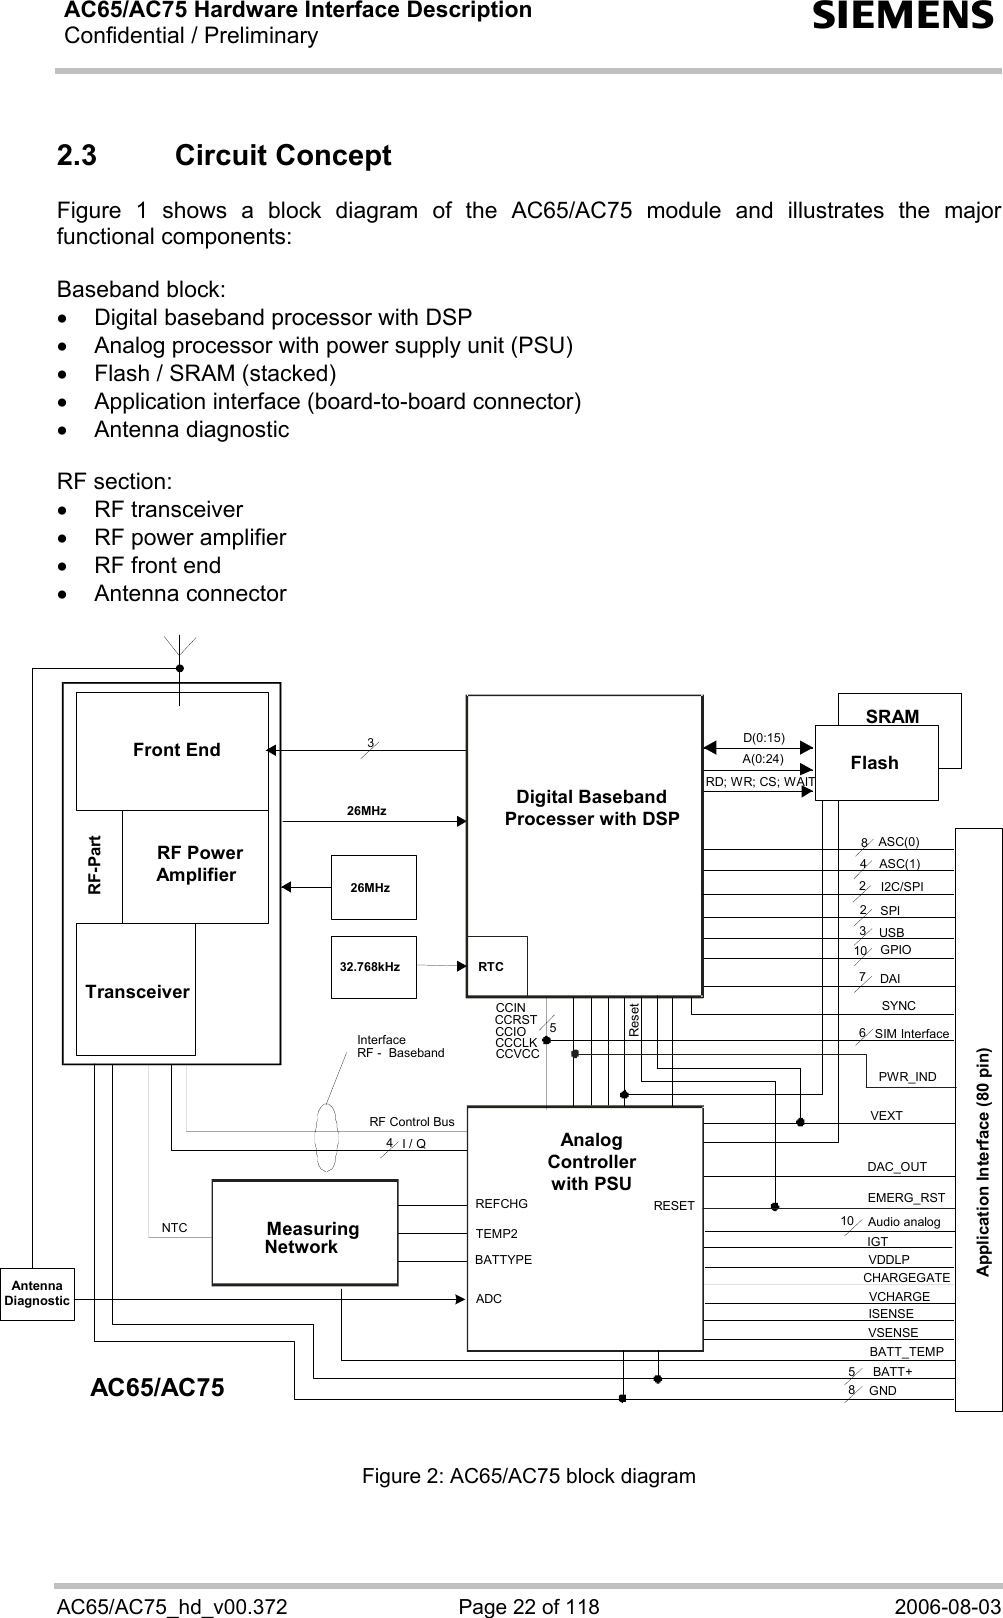 AC65/AC75 Hardware Interface Description Confidential / Preliminary  s AC65/AC75_hd_v00.372  Page 22 of 118  2006-08-03 2.3 Circuit Concept Figure 1 shows a block diagram of the AC65/AC75 module and illustrates the major functional components:   Baseband block: •  Digital baseband processor with DSP •  Analog processor with power supply unit (PSU) •  Flash / SRAM (stacked) •  Application interface (board-to-board connector) • Antenna diagnostic  RF section: • RF transceiver •  RF power amplifier •  RF front end • Antenna connector  Digital BasebandProcesser with DSPBATT+GNDIGTEMERG_RSTASC(0)5SIM InterfaceCCINCCRSTCCIOCCCLKCCVCCD(0:15)A(0:24)RD; WR; CS; WAITRF Control BusInterfaceRF -  BasebandNTCBATT_TEMPVDDLPSYNCTransceiverRF PowerAmplifierSRAMFlash6588AC65/AC75I / Q4Audio analogDAC_OUT10USBGPIO310I2C/SPISPI22VEXTISENSEVSENSEVCHARGECHARGEGATE3RESETBATTYPETEMP2REFCHGASC(1)426MHzFront EndDAI7PWR_INDMeasuringNetwork32.768kHz26MHzRTCApplication Interface (80 pin)RF-PartAnalogControllerwith PSUResetAntennaDiagnosticADC Figure 2: AC65/AC75 block diagram  